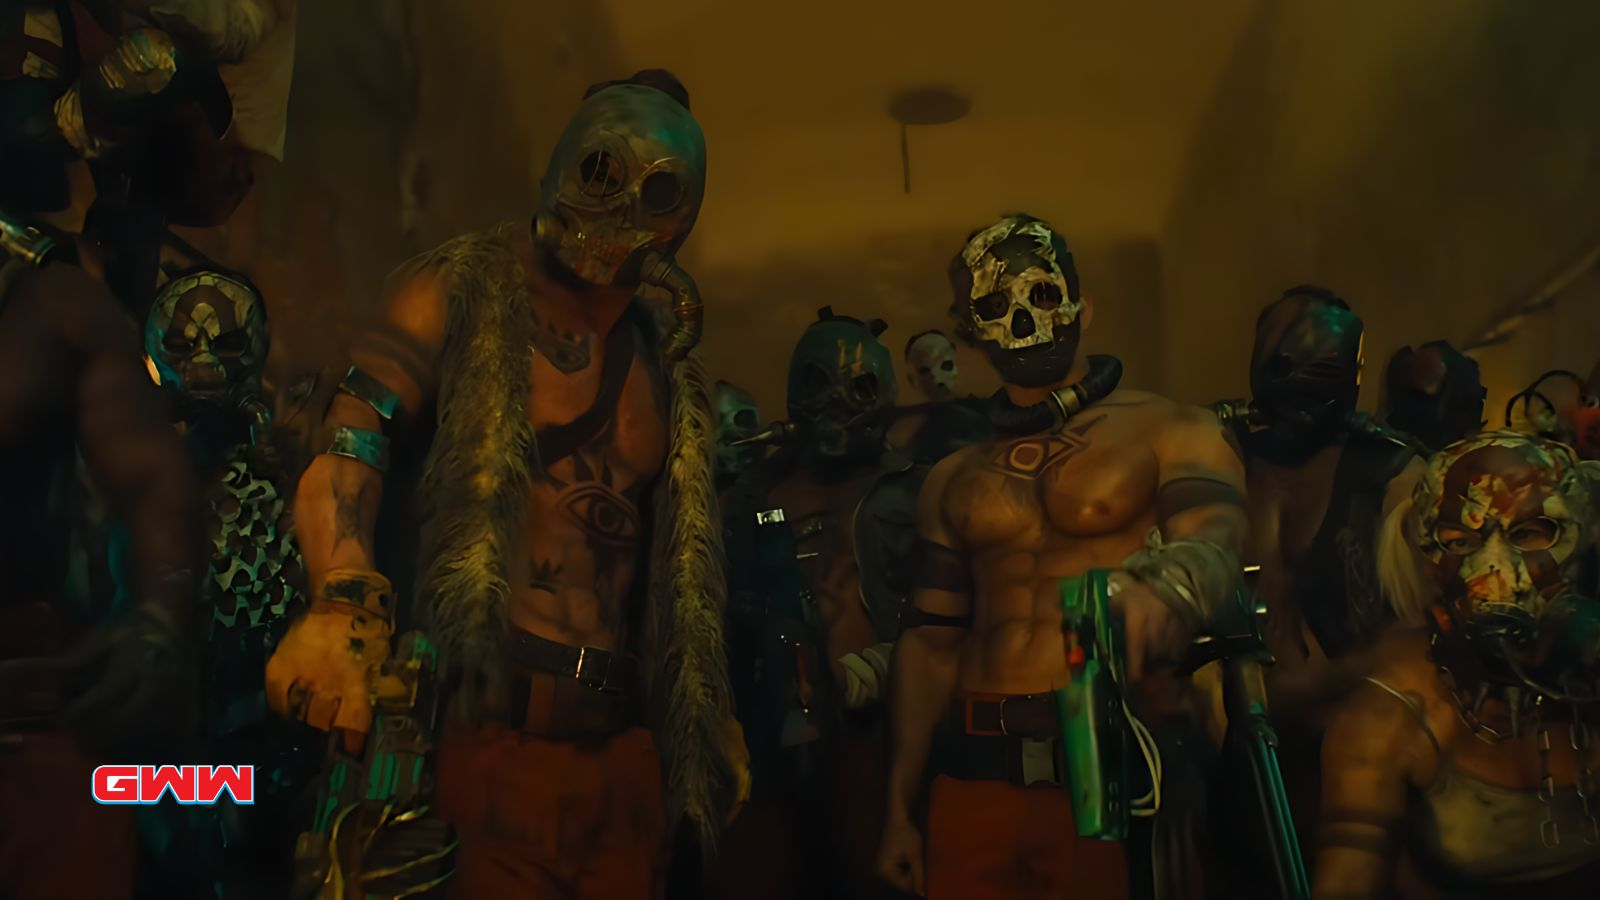 Group of masked, tattooed individuals in a dark, intense setting.